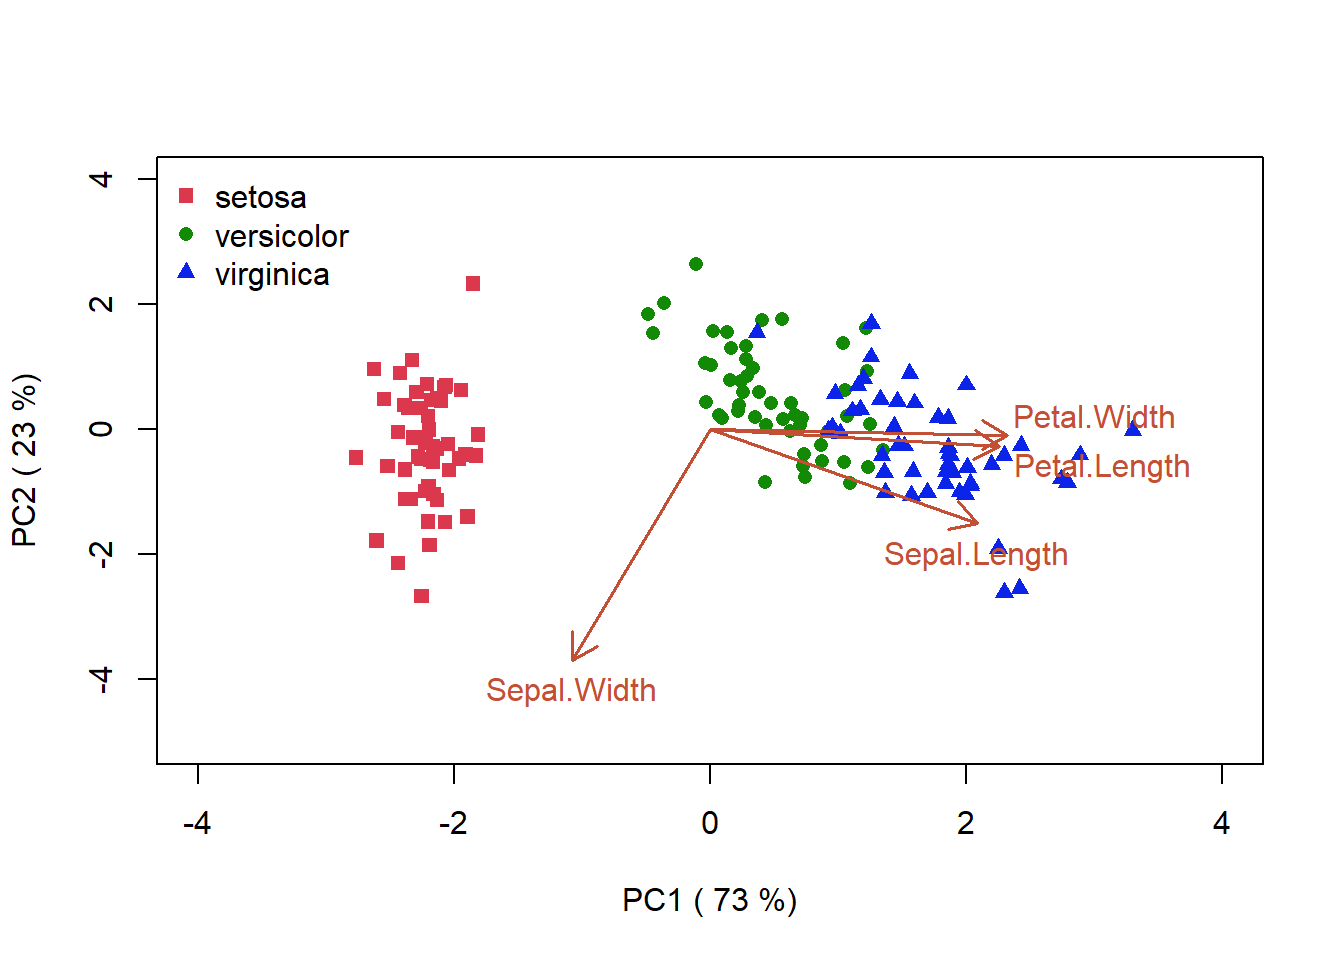 A plot with x-axis labelled 'PC1 (73%)' and y-axis labelled 'PC2 (23%)'. Moving from left to right on the x-axis it shows a centered cluster of 'setosa', 'versicolor' to 'virginica' and 4 arrowed lines emerge from the center and pointing in various directions labelled 'Sepal.Width', 'Sepal.Length' 'Petal.Length', and 'Petal.Width'